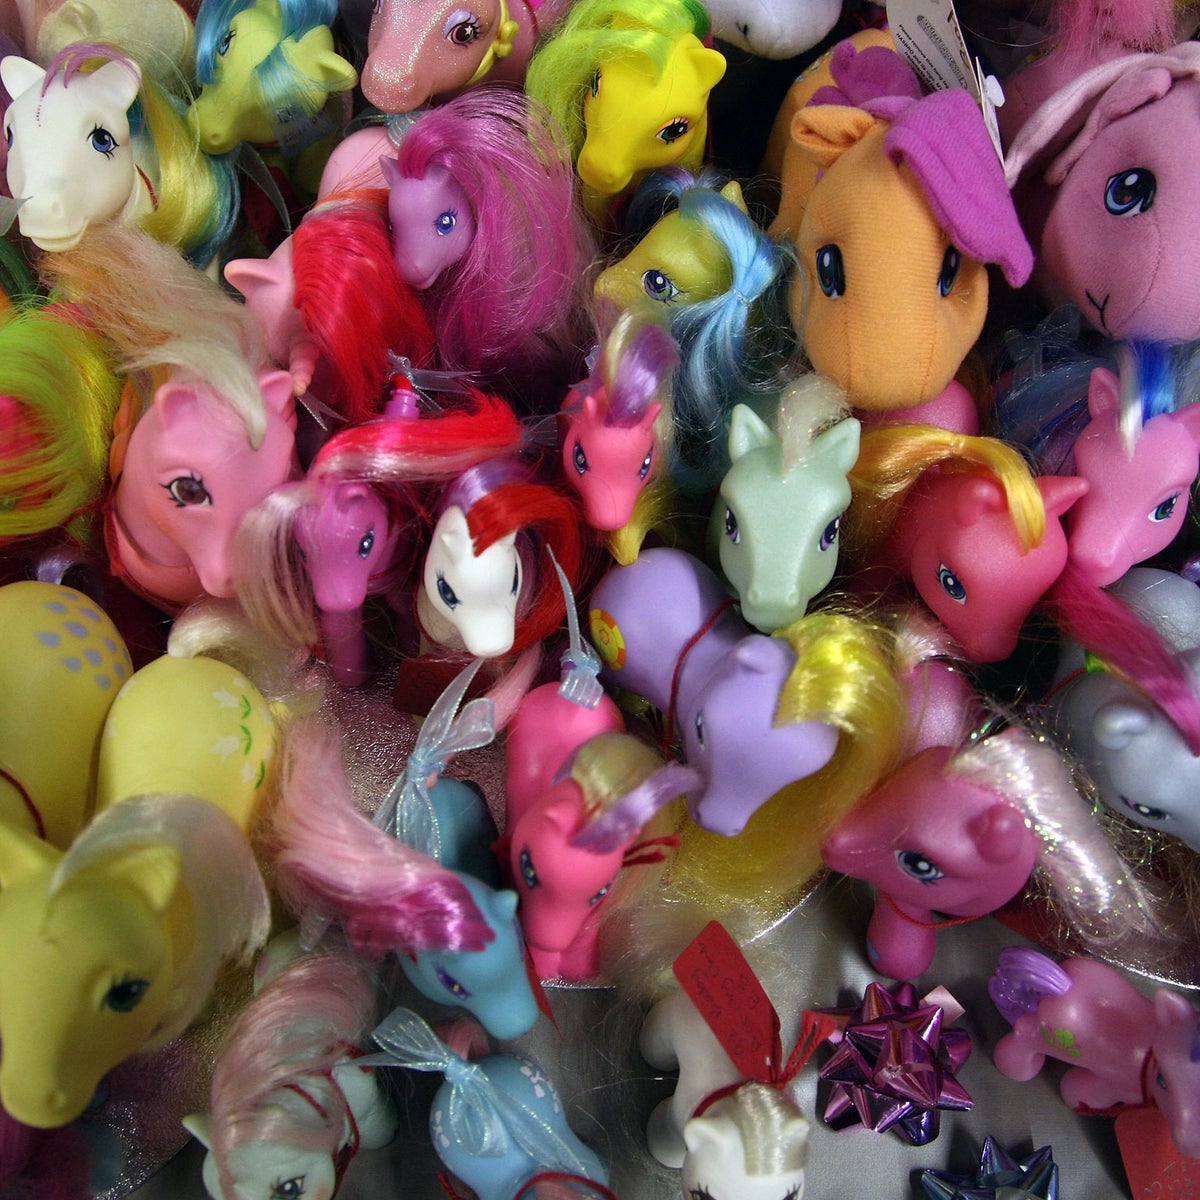 Police called to investigate 'LGBT+ propaganda' at My Little Pony